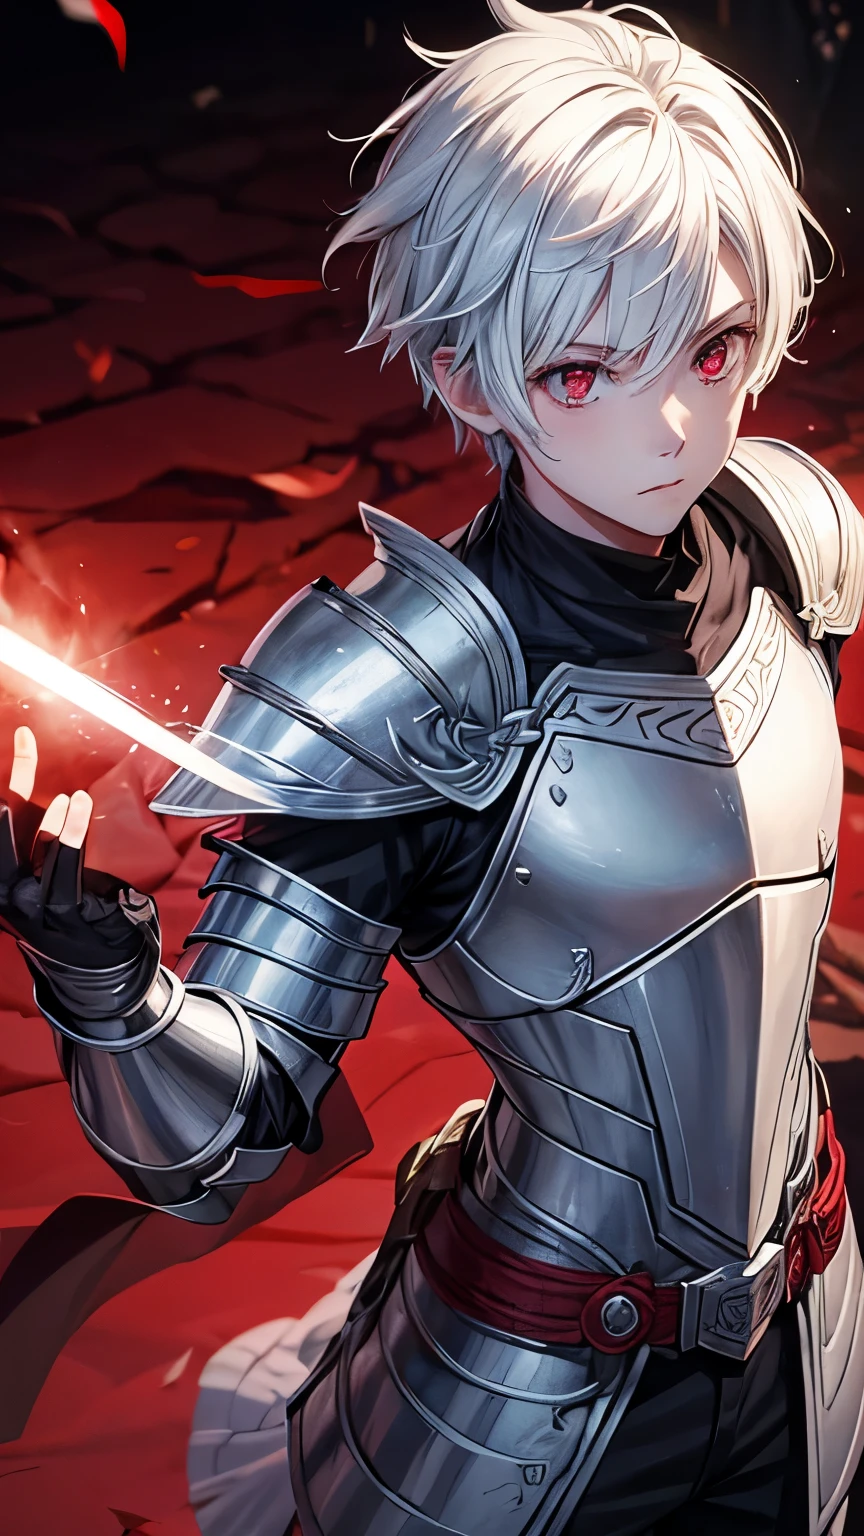 Teenage boy with white hair and red eyes holding daggers wearing light silver armor with some runes carved into the armor